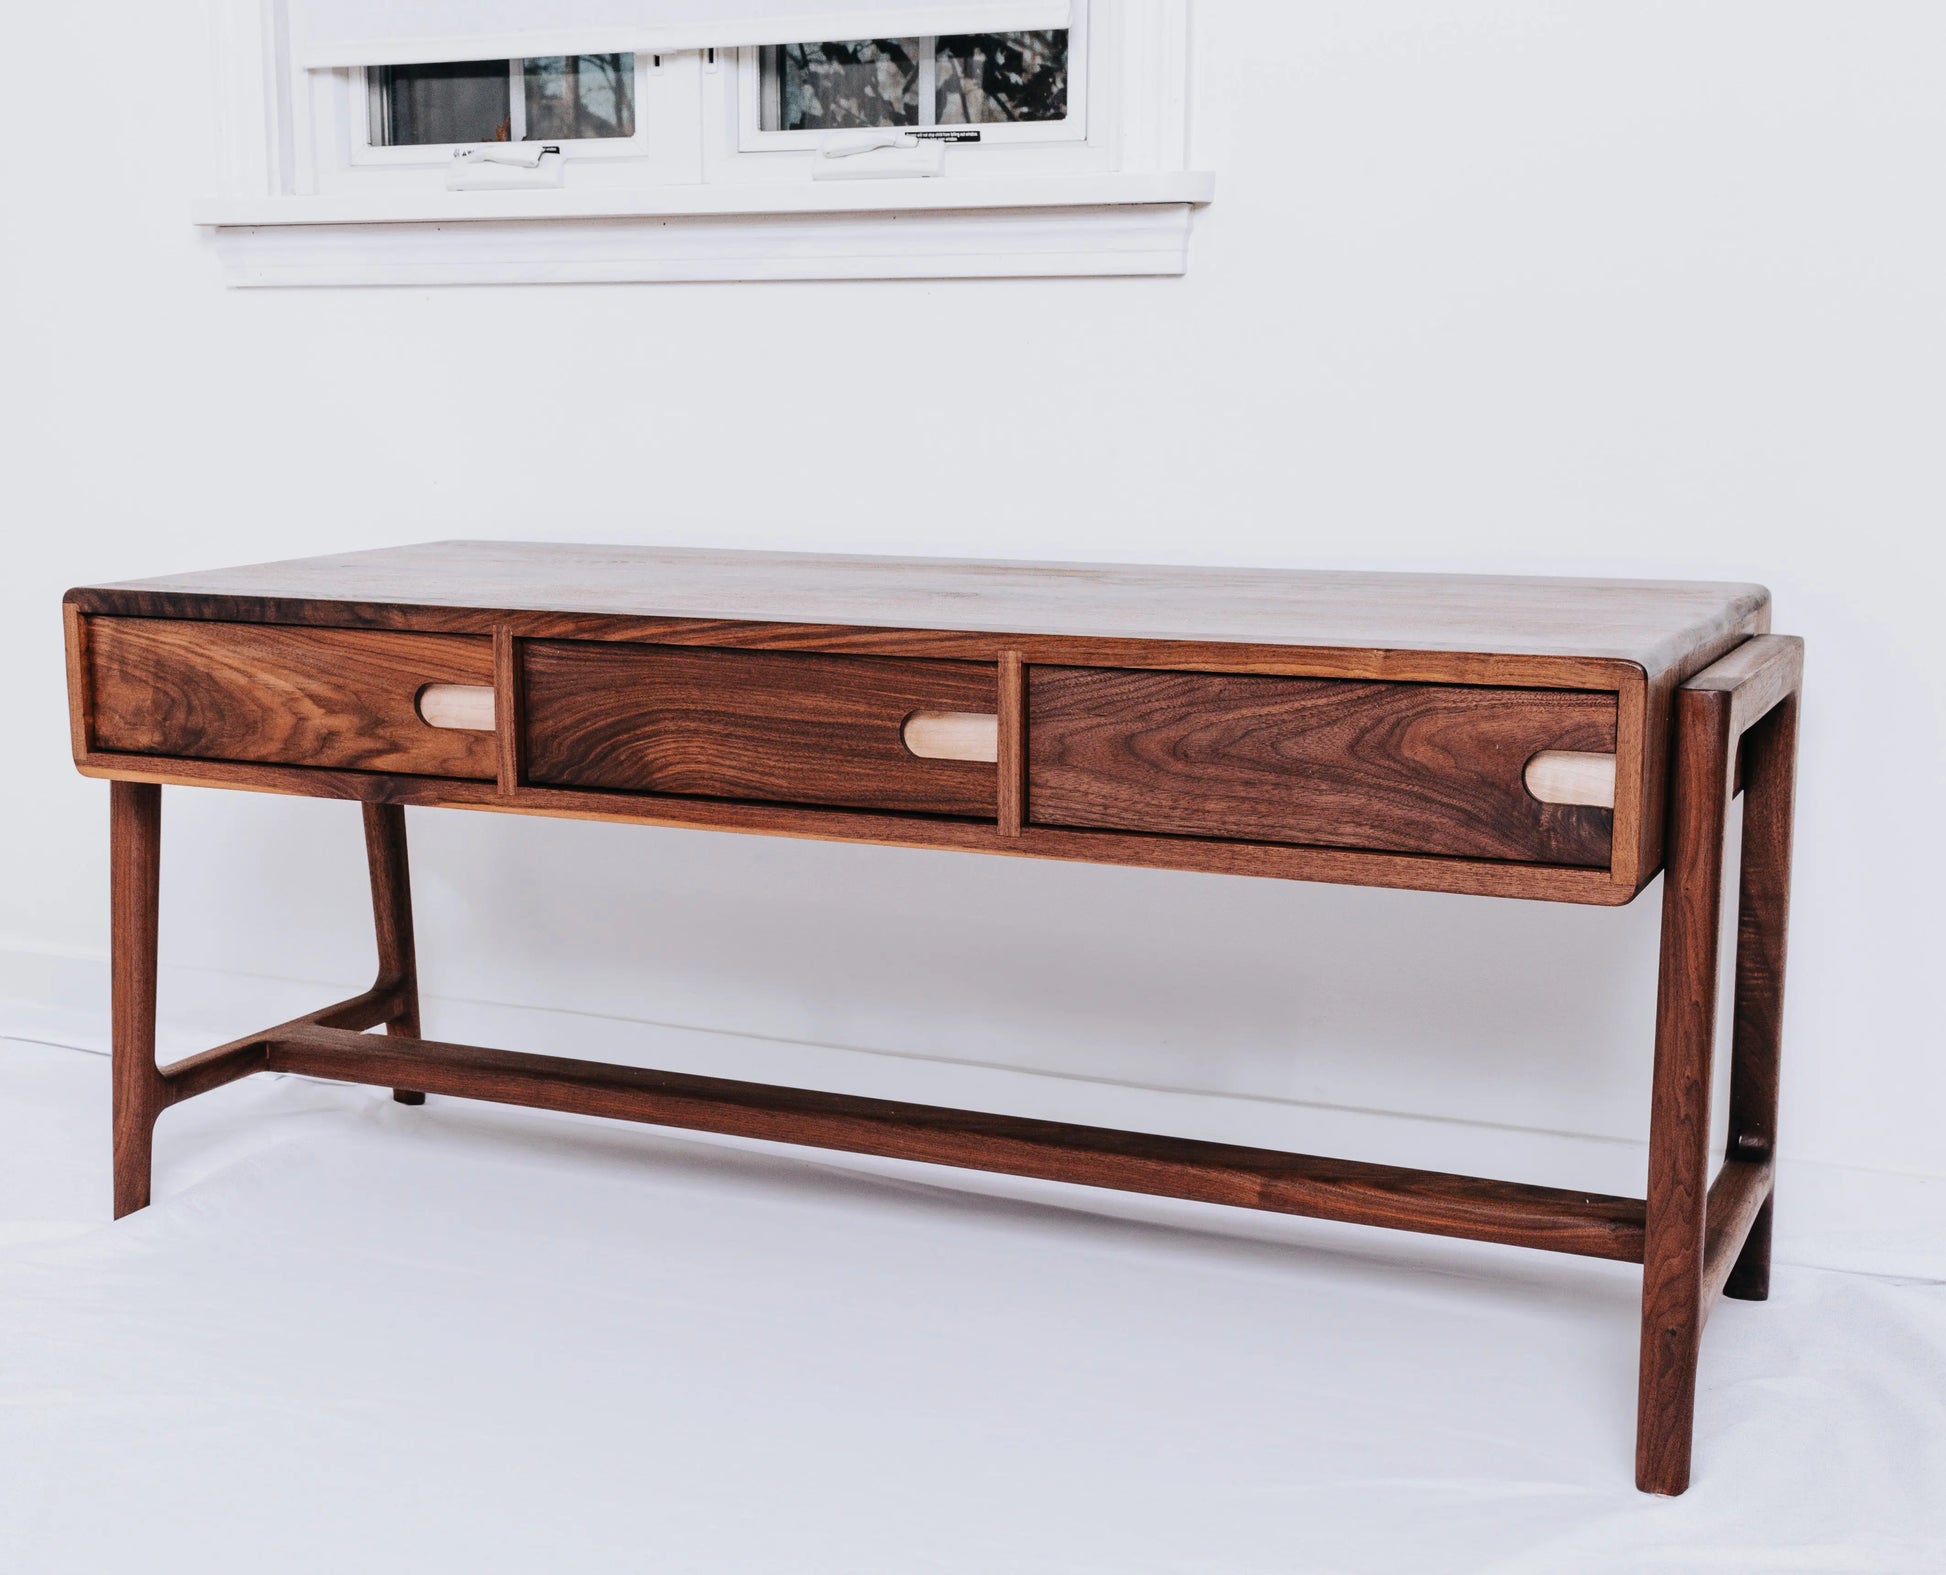 Luxury black walnut coffee table with rock maple features, embodying Nordic design and Ohio craftsmanship.